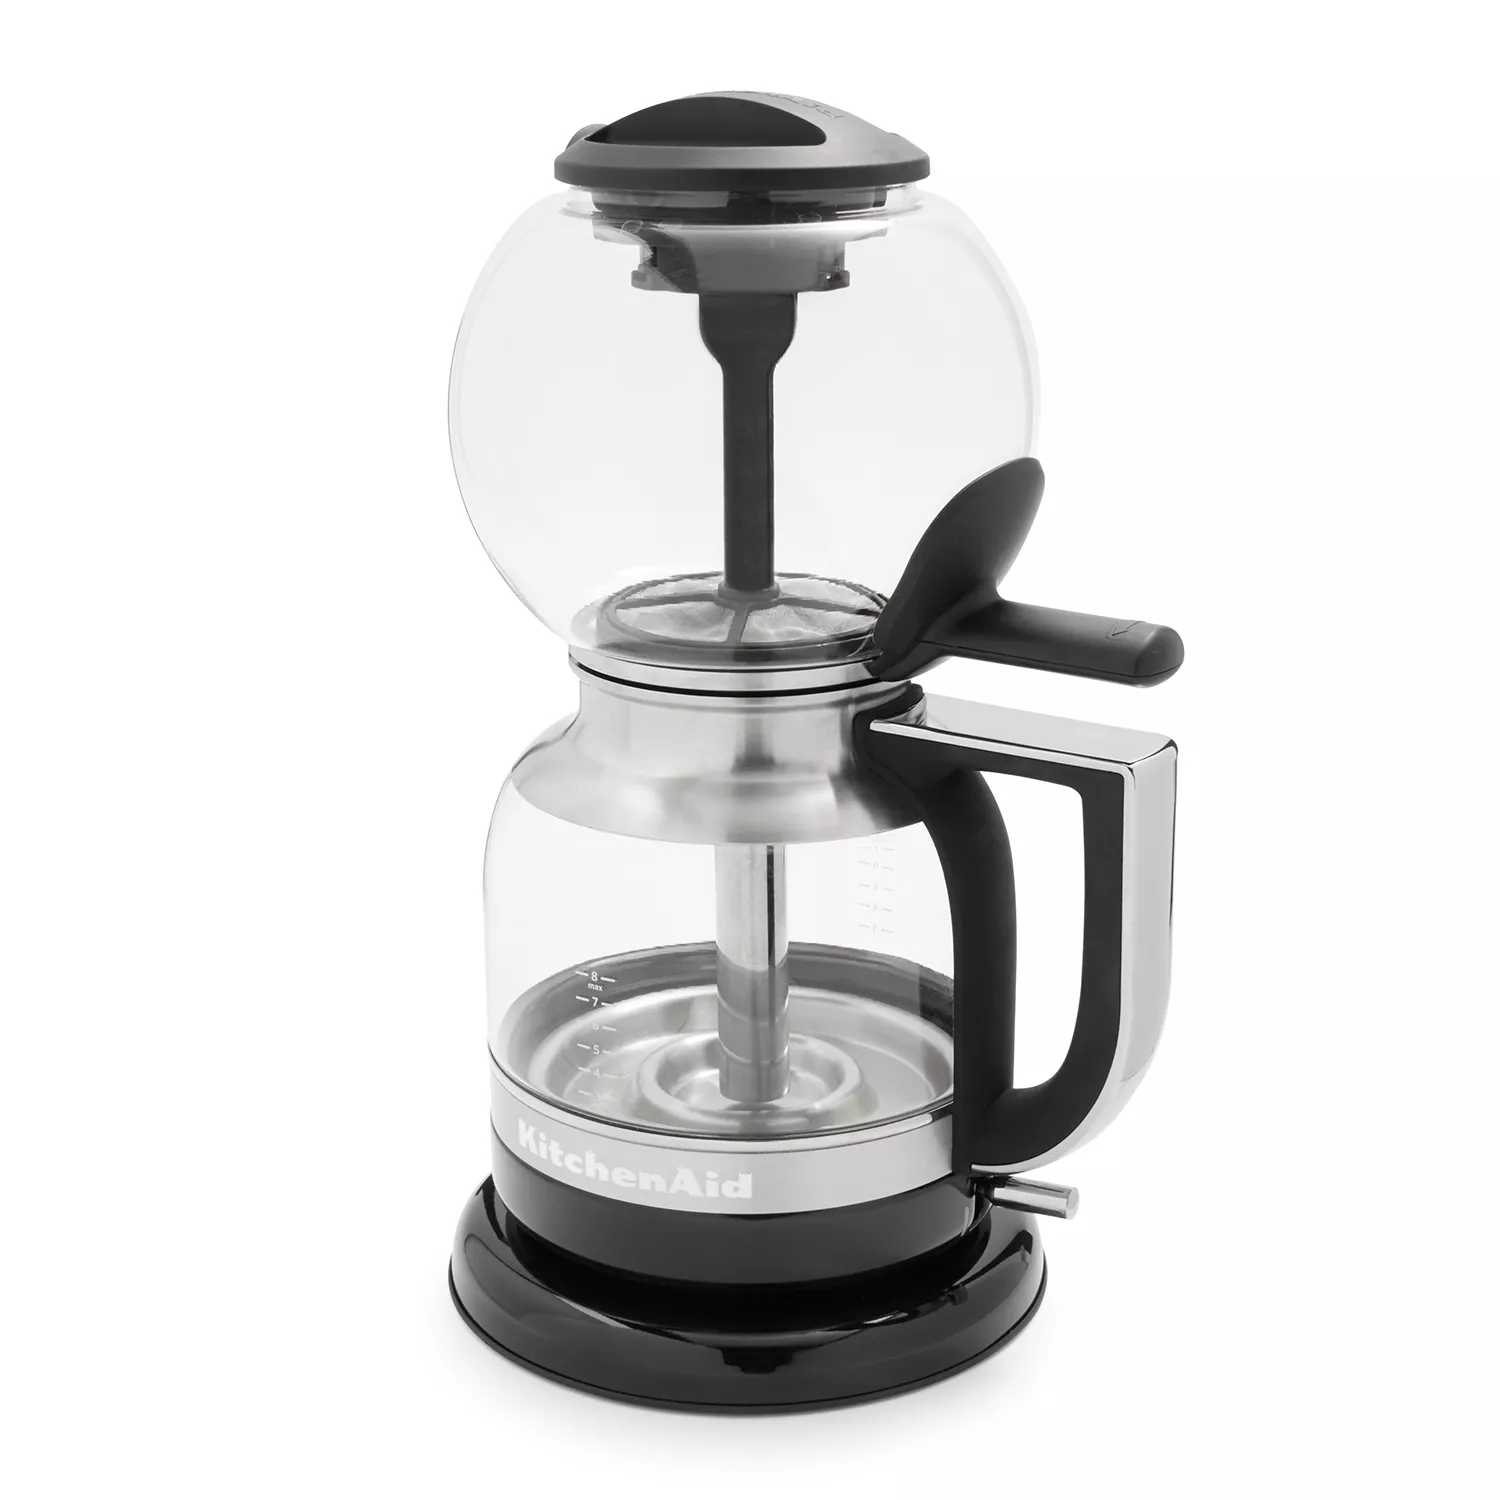 KitchenAid Siphon Brewer review: Seductively strong, rich coffee